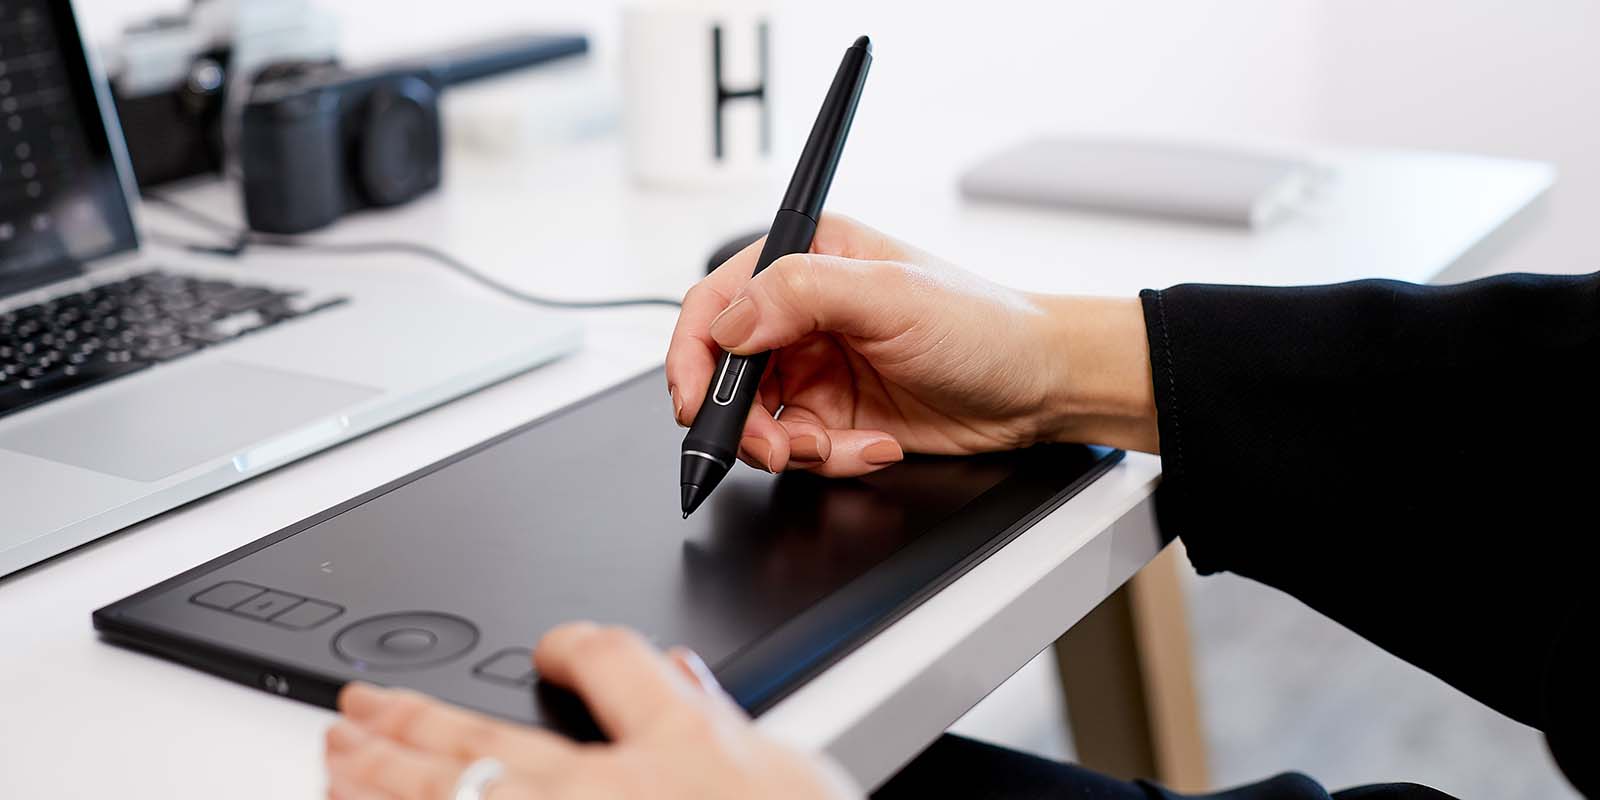 Intuos Pro and Wacom Pen Feature